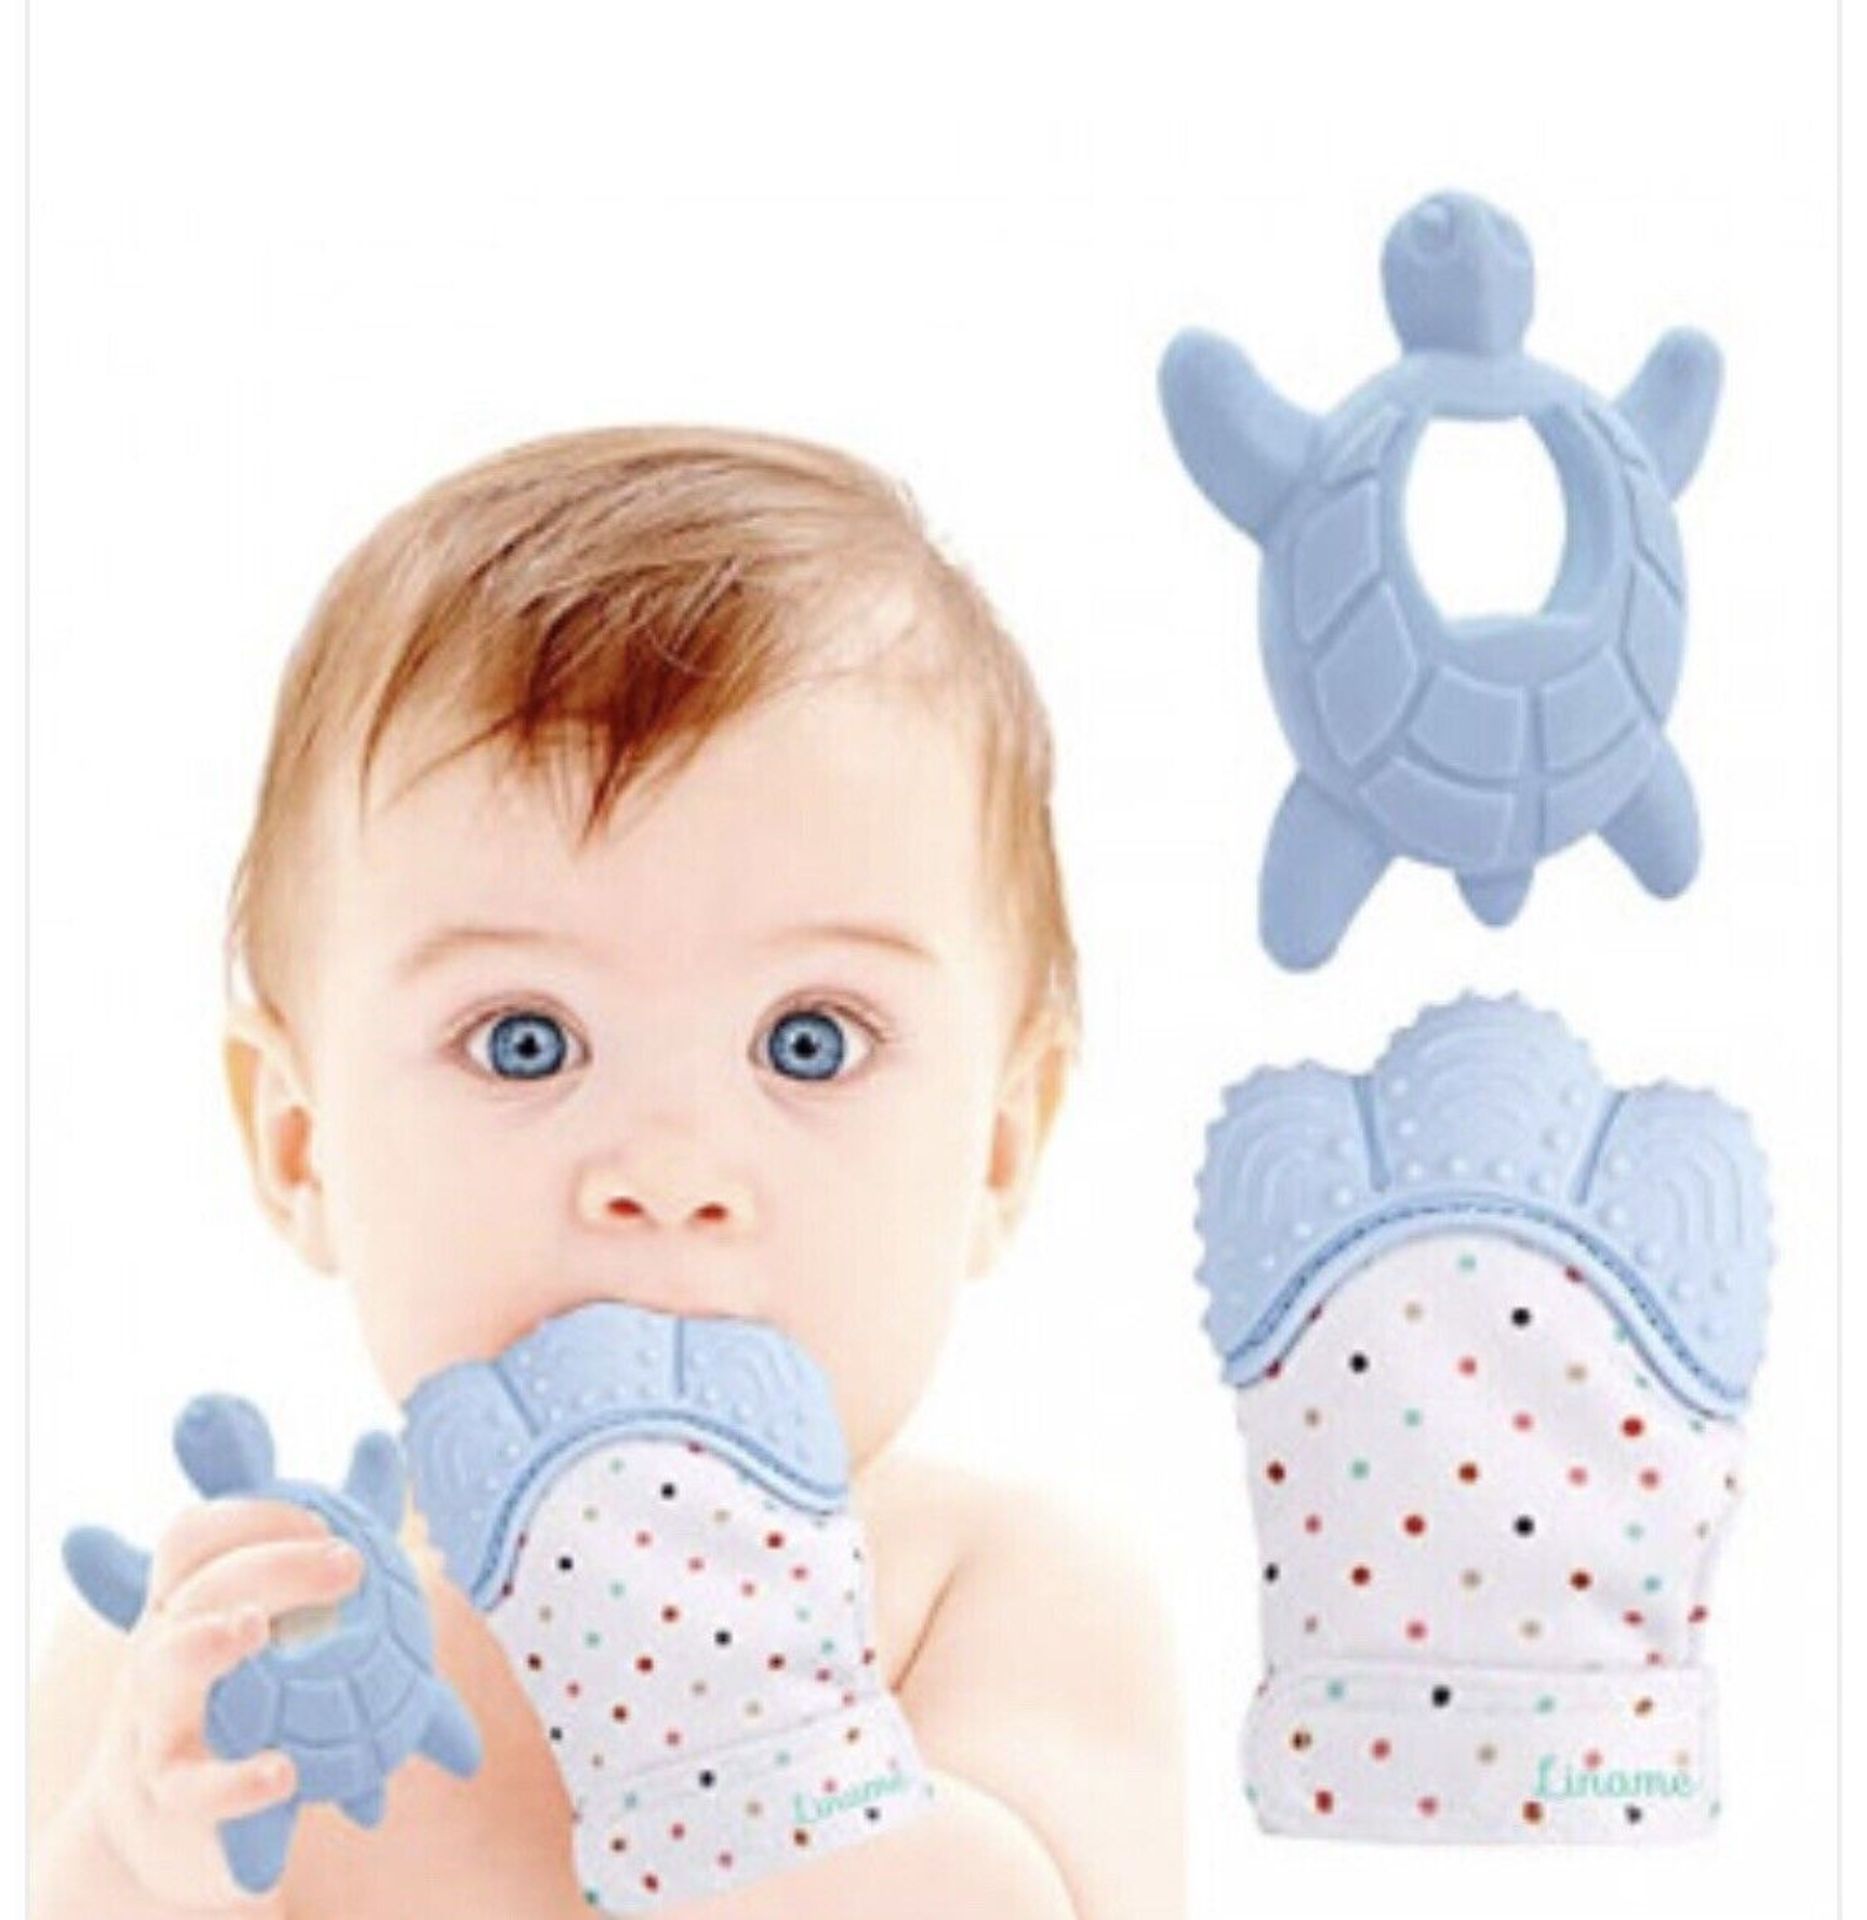 50 X BRAND NEW LINAME PREMIUM TEETHIMG SETS WITH GIRAFFE MITTEN AND FROG TEETHING TOY R10-11